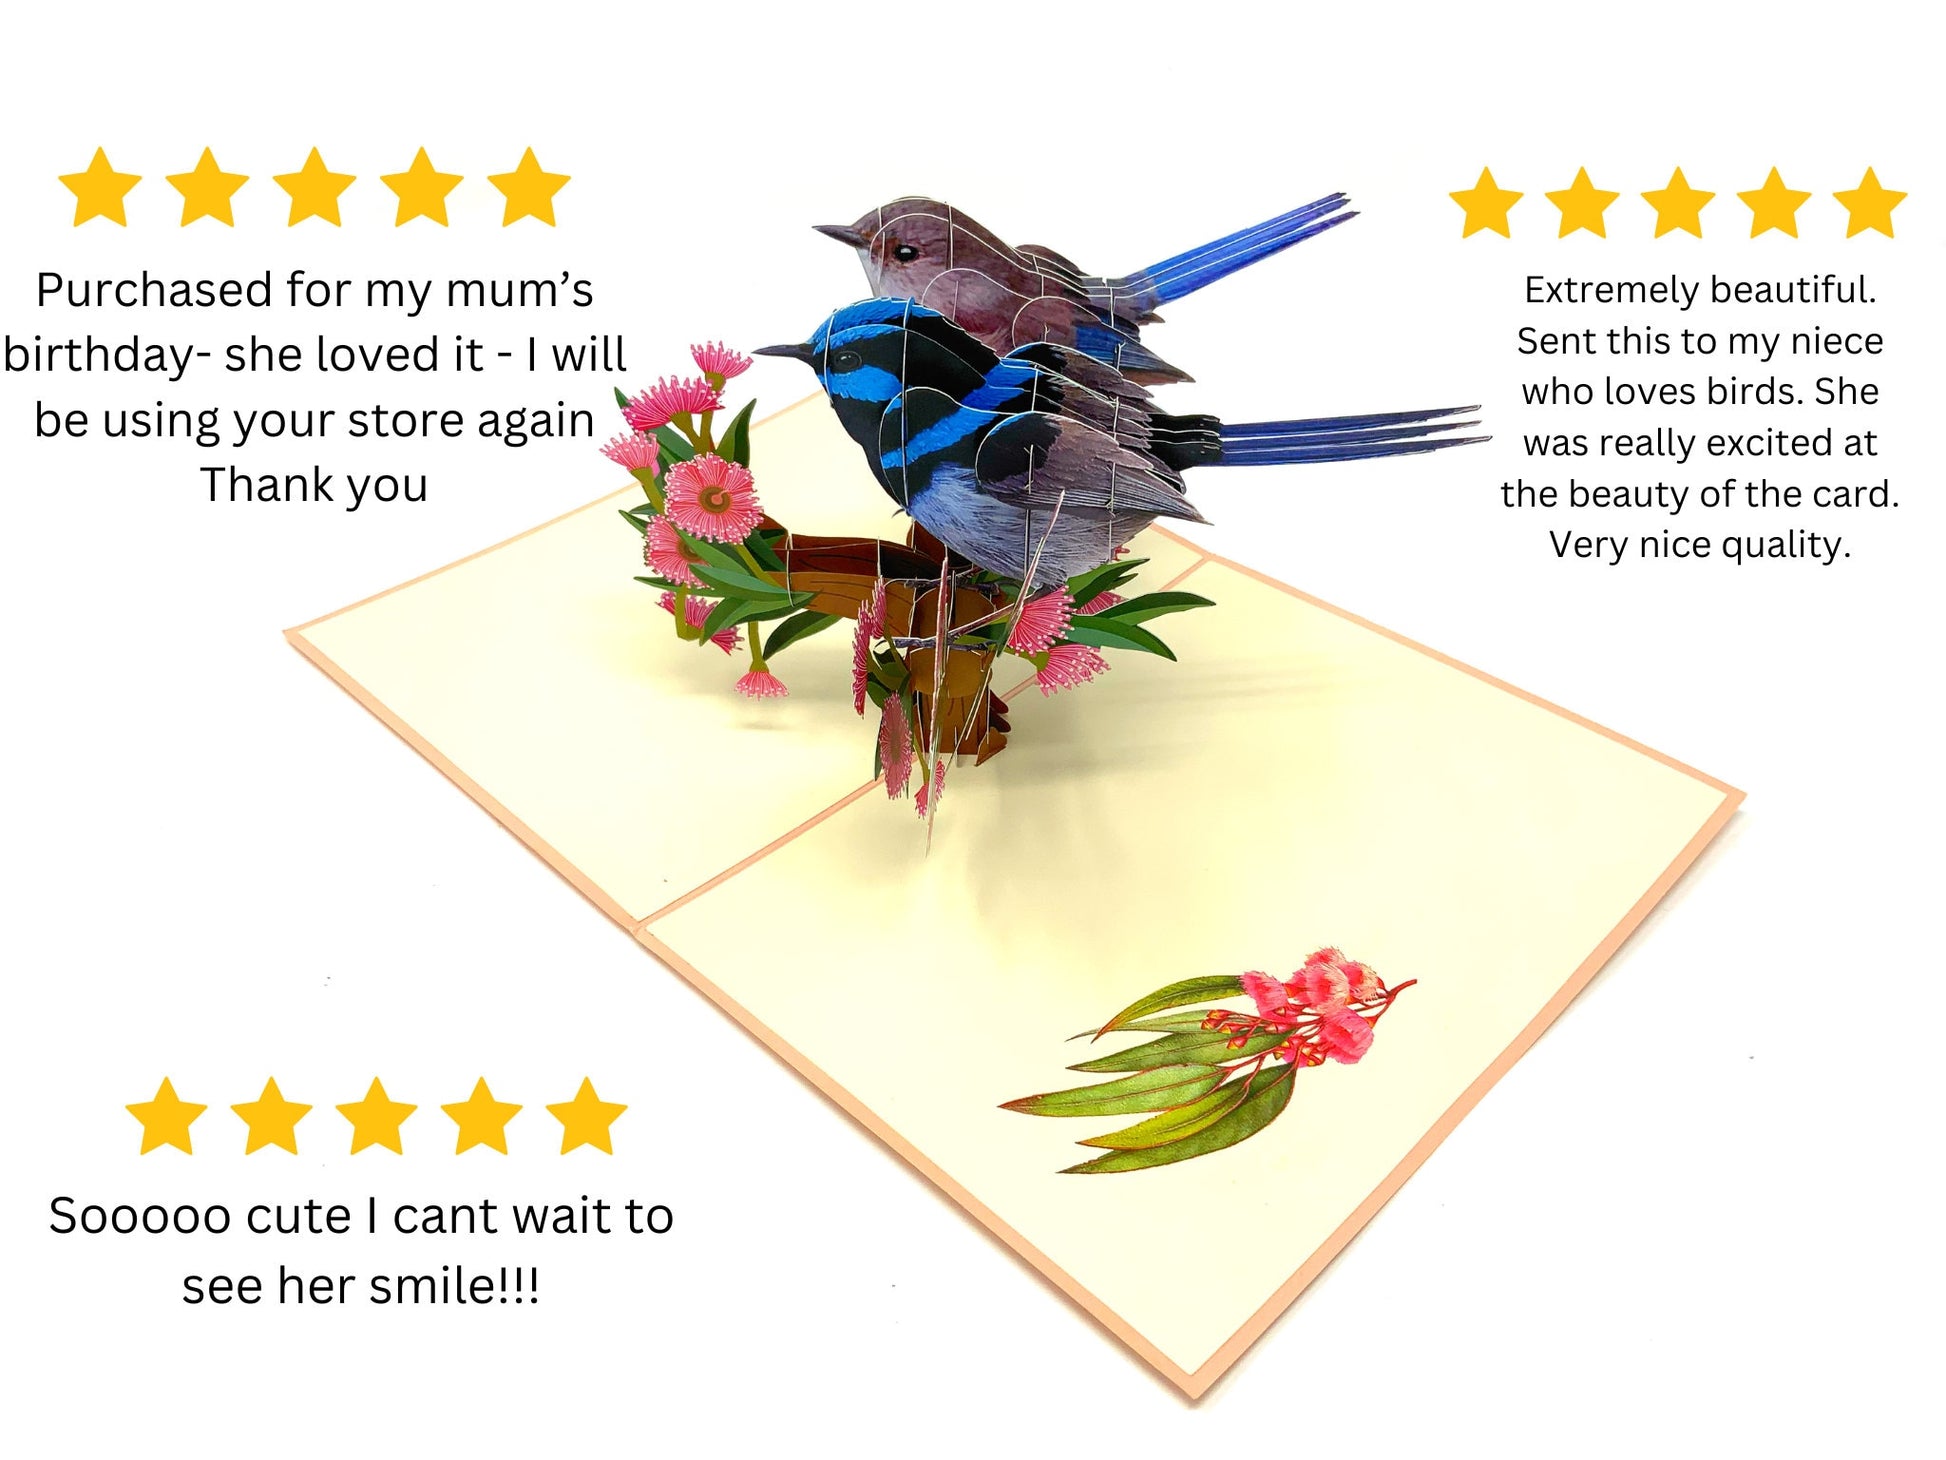 &quot;Feathered Perfection: A Five-Star Card Showcasing Two Charming Wrens - Rave Reviews for a Card that Sings the Melody of Nature and Celebration!&quot;